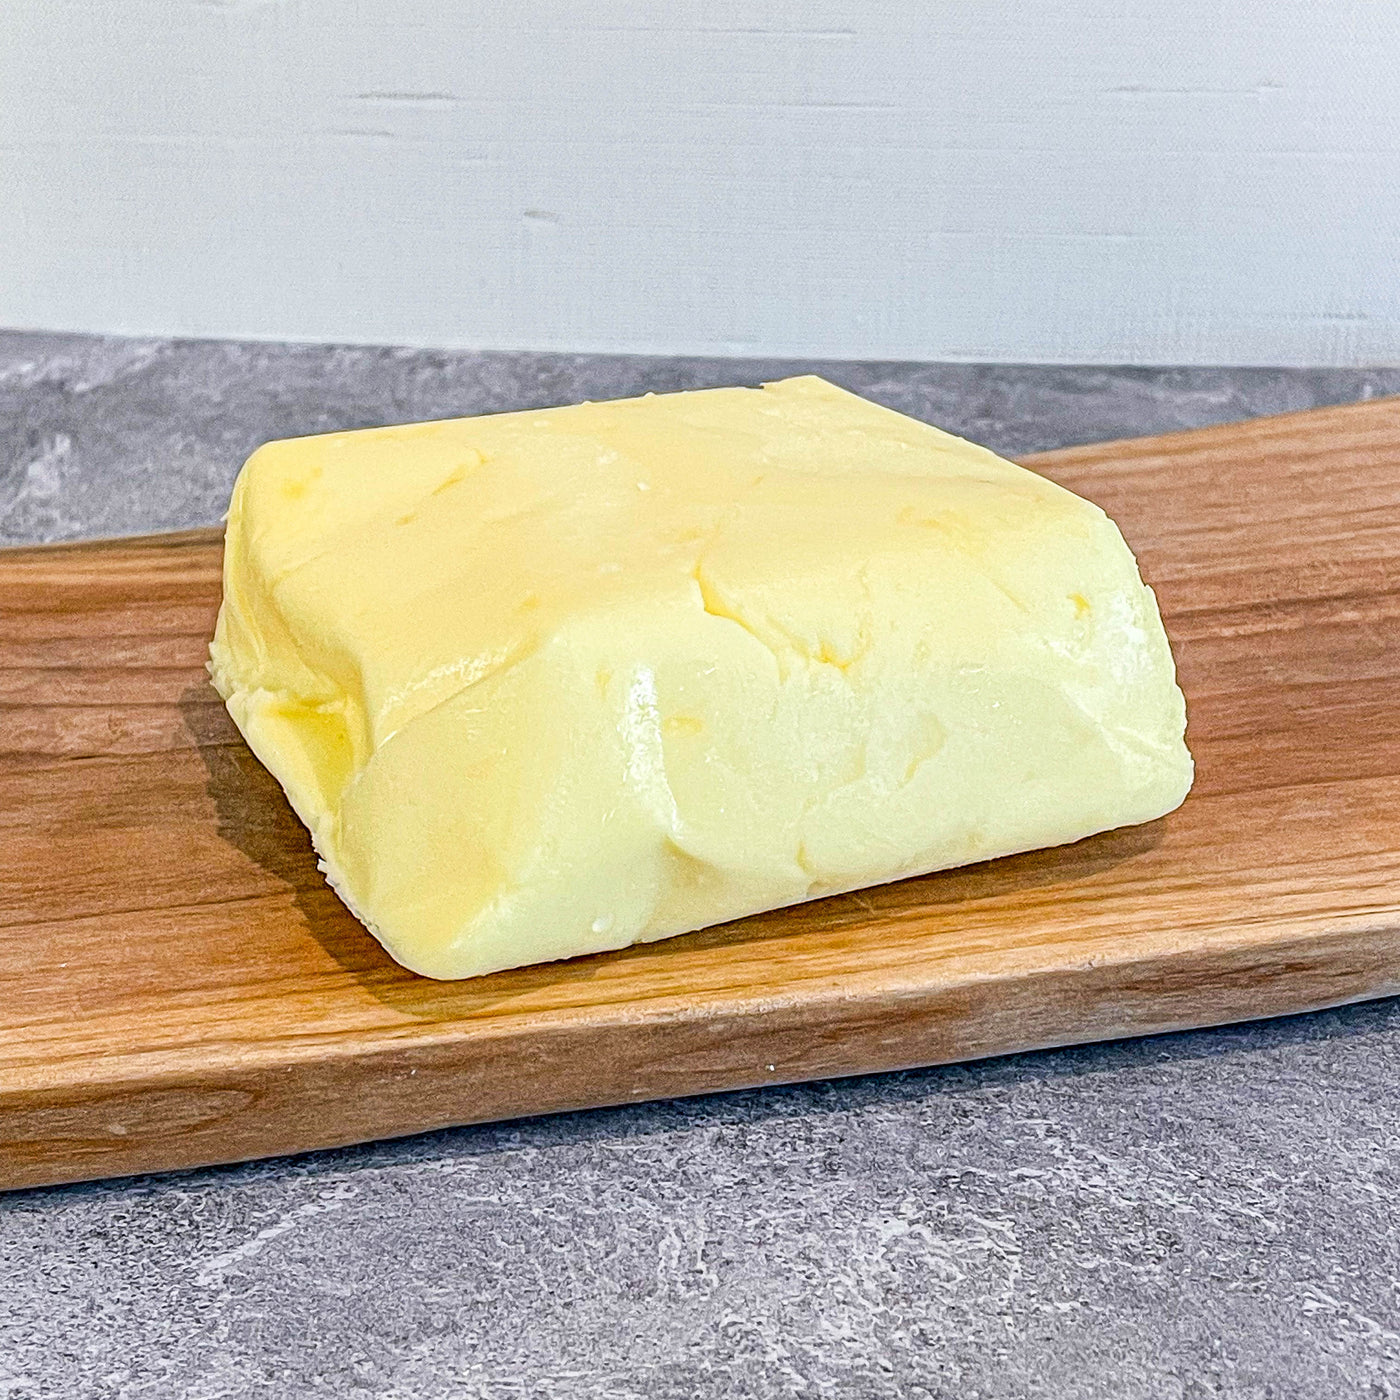 SALTED CULTURED BUTTER / Ploughgate Creamery / Vermont / Past. Cow / Butter